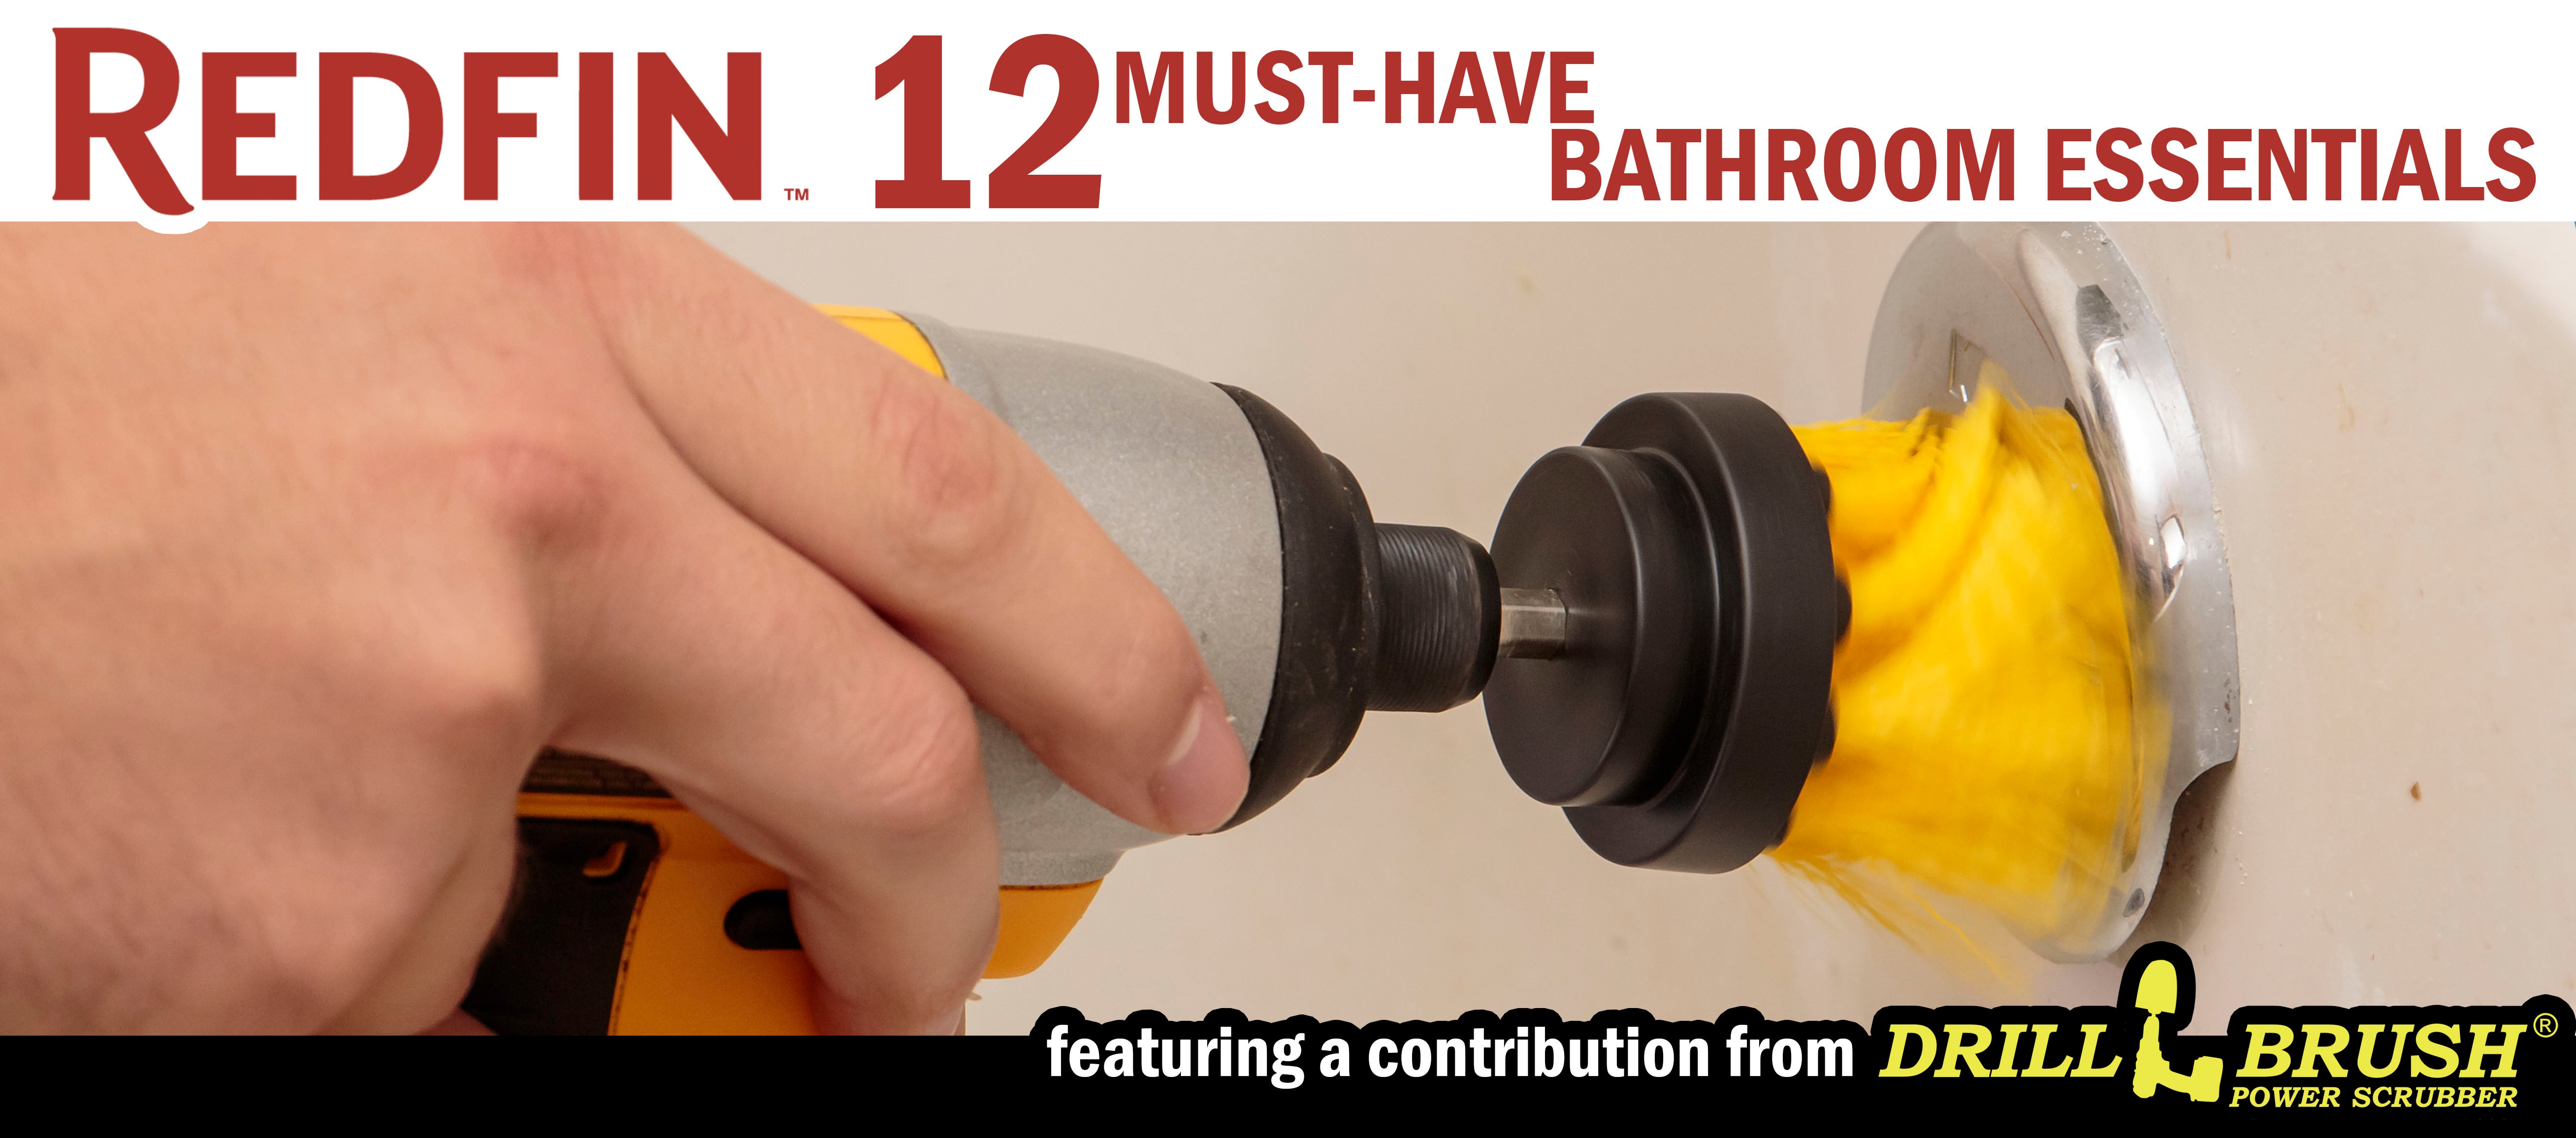 Drillbrush’s Contributes to Redfin Real Estate’s “12 Must-Have Bathroom Essentials”